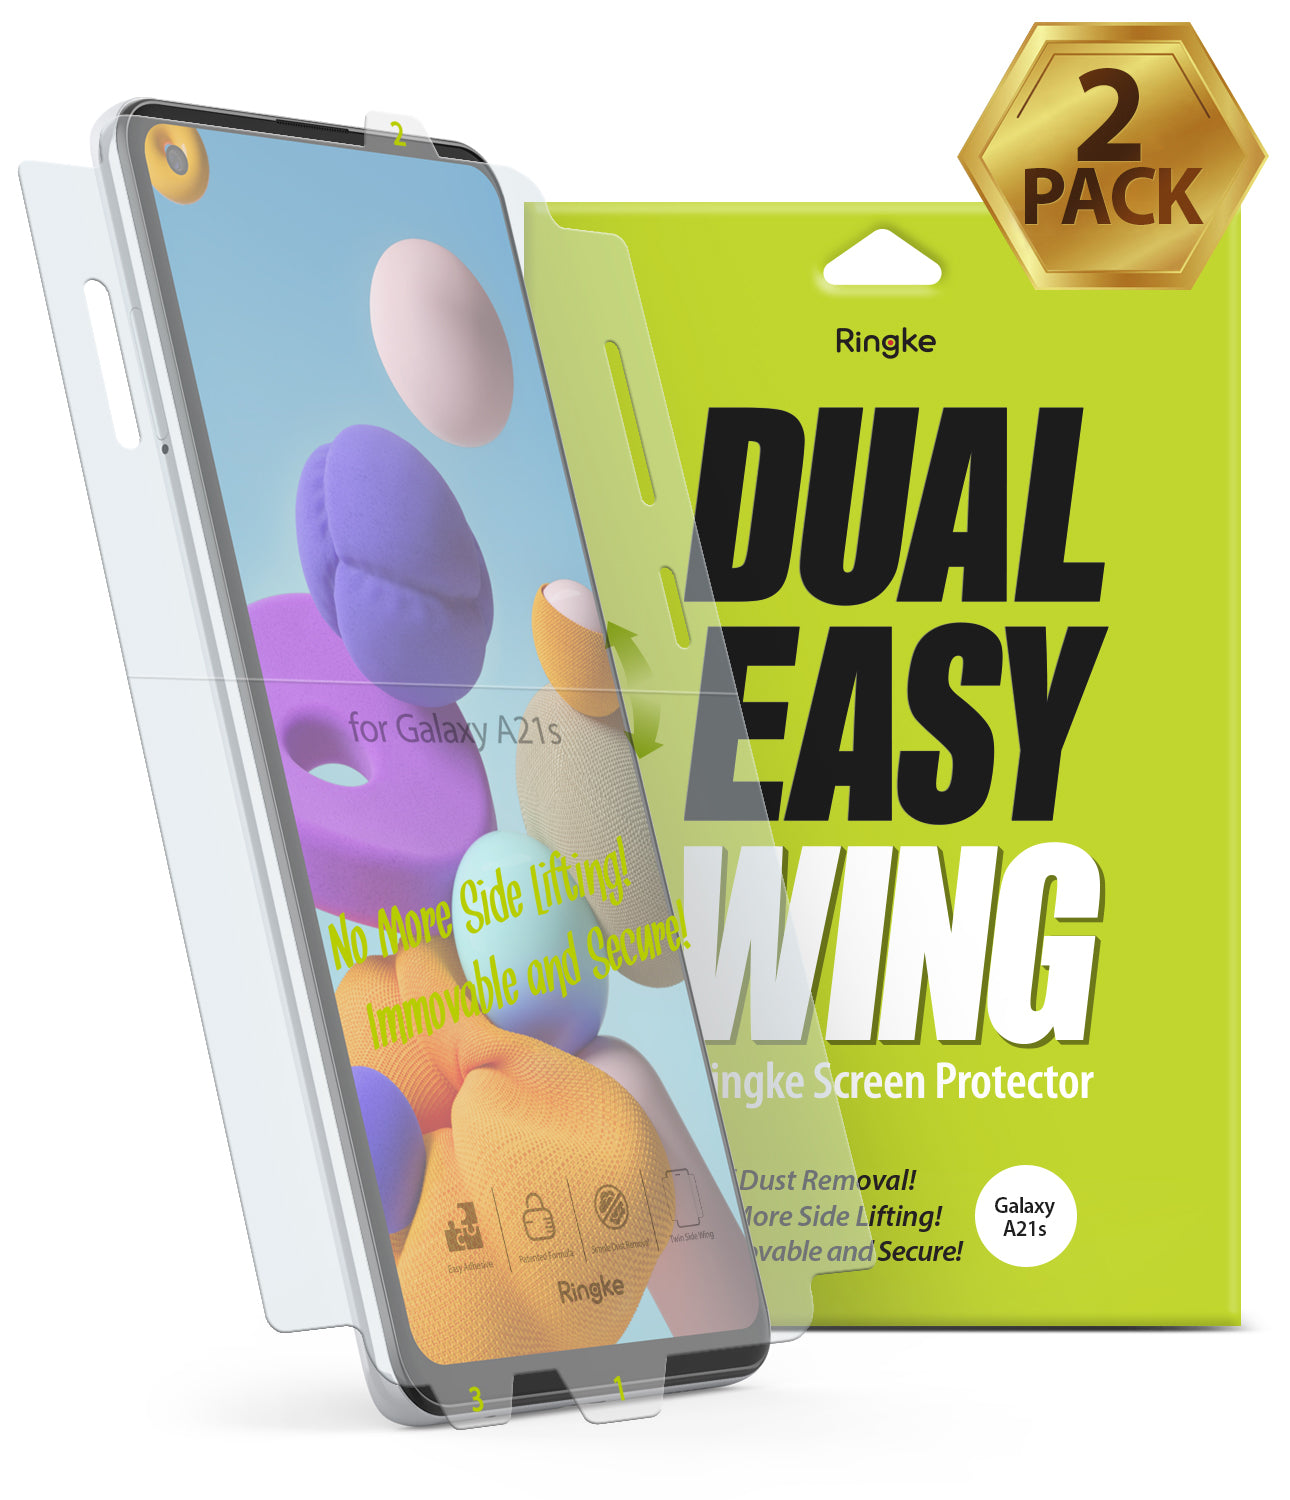 samsung galaxy a21s screen protector - ringke dual easy film wing